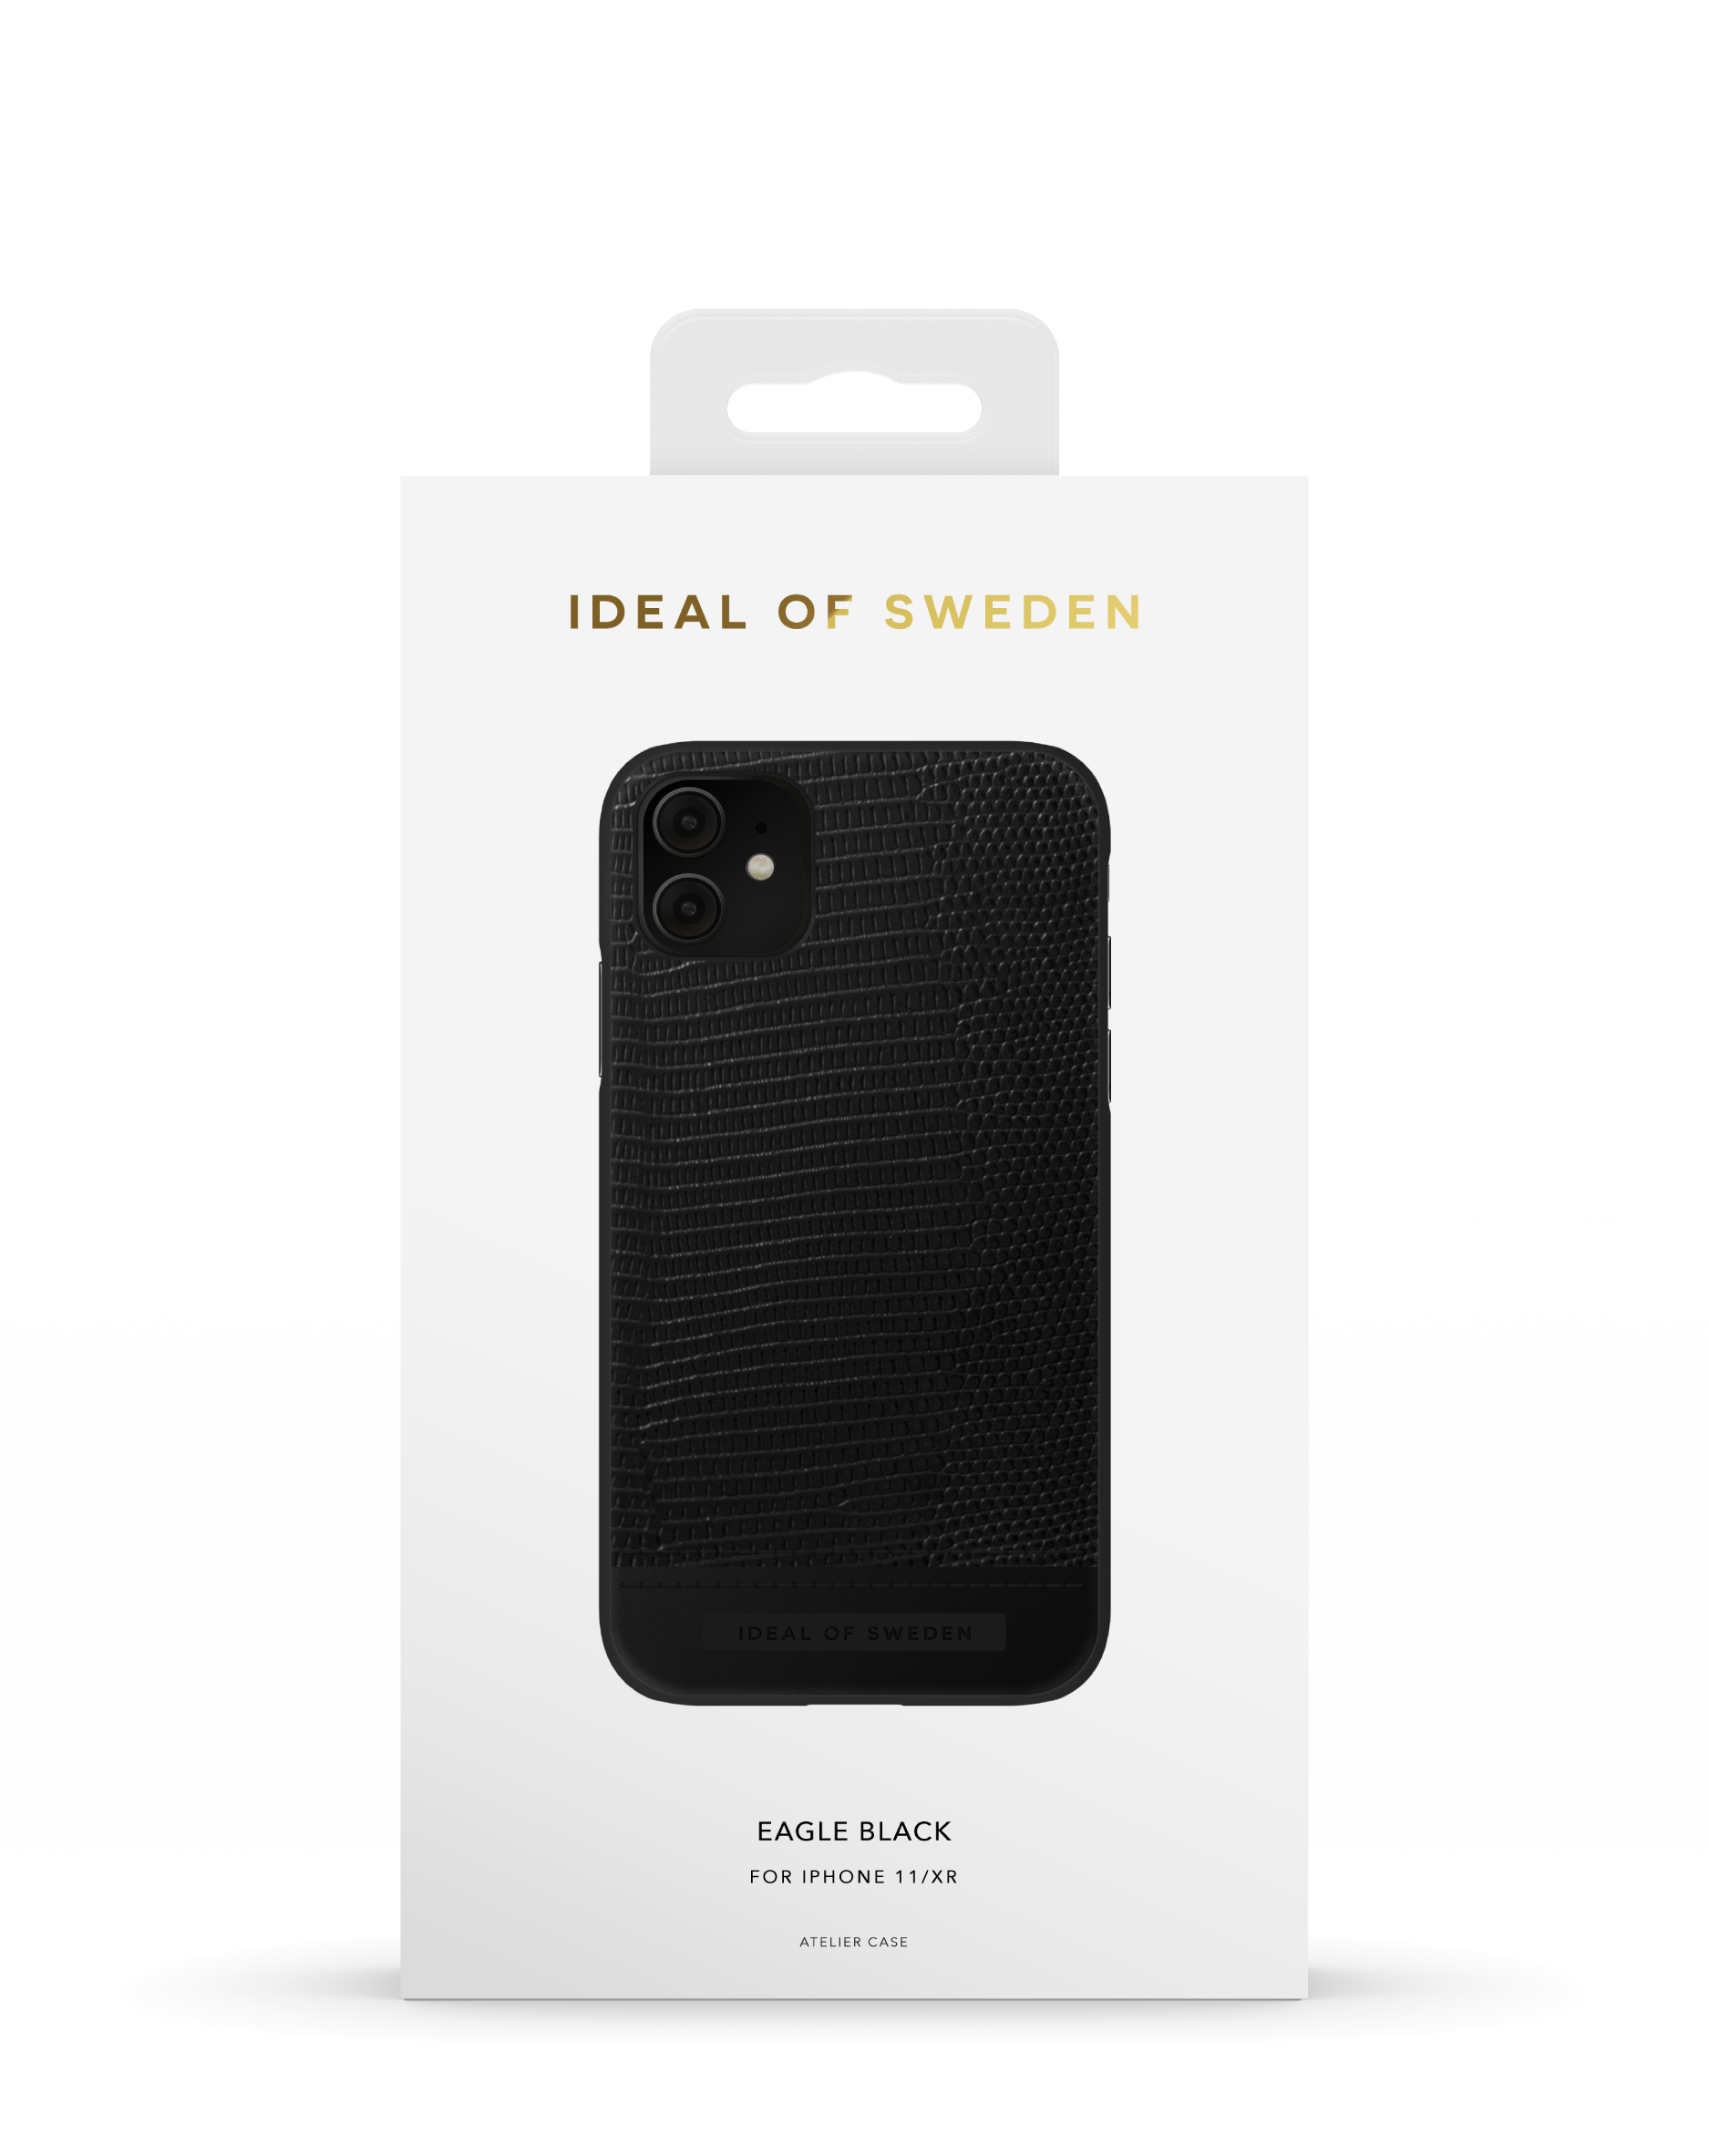 IDEAL OF SWEDEN IDACAW20-1961-229, Backcover, 11, XR, Eagle iPhone Apple, Black iPhone